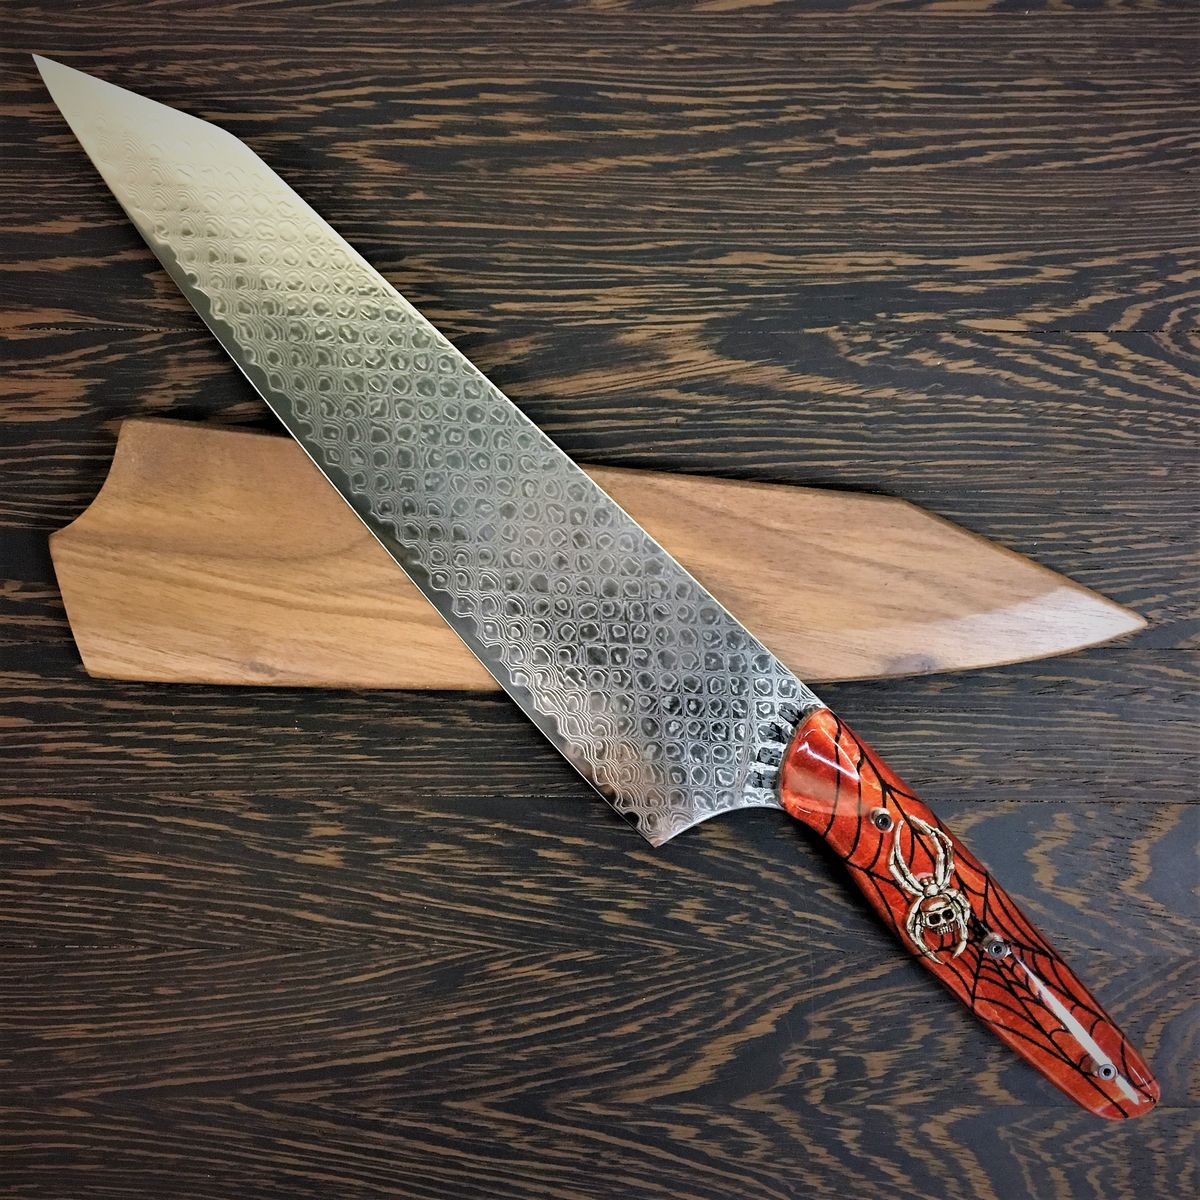 Widowmaker - Gyuto K-tip 10in Chef's Knife - Spider Web Handle - Scale Damascus